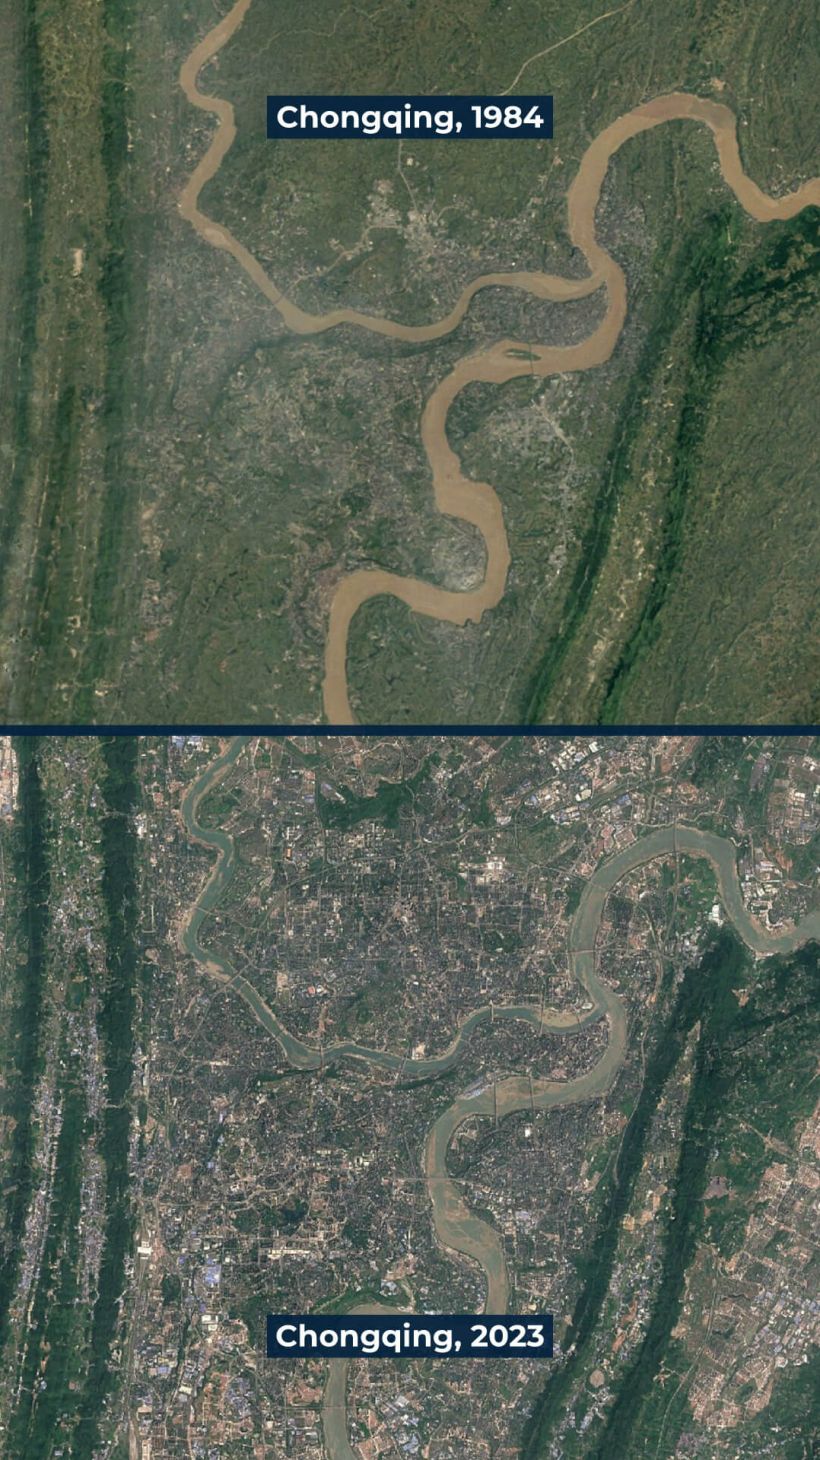 INTERACTIVE Chongqing Before and After satellite image